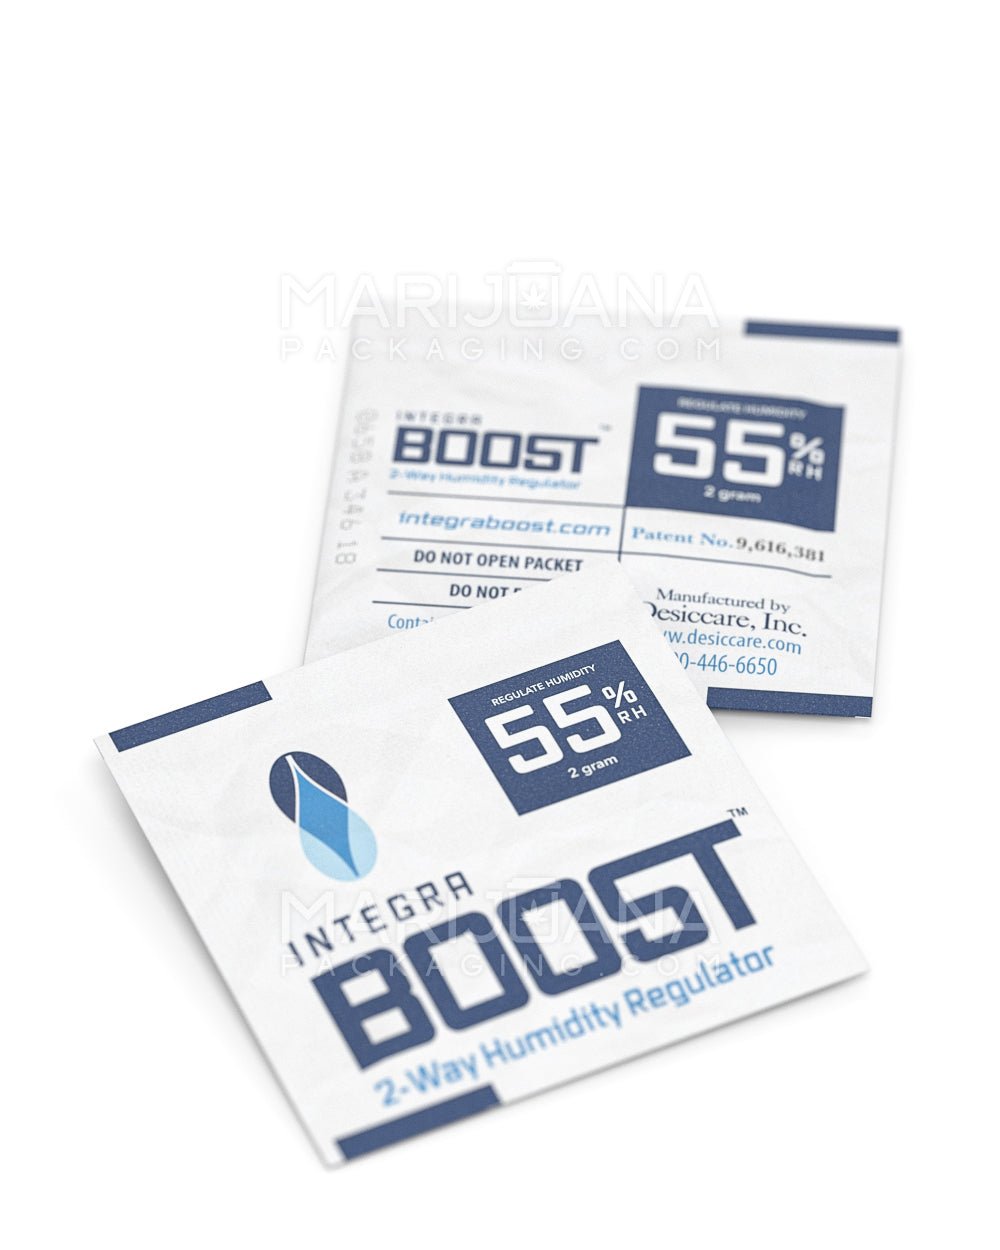 INTEGRA | Boost Humidity Control Packs | 2 Grams - 55% - 2000 Count - 5